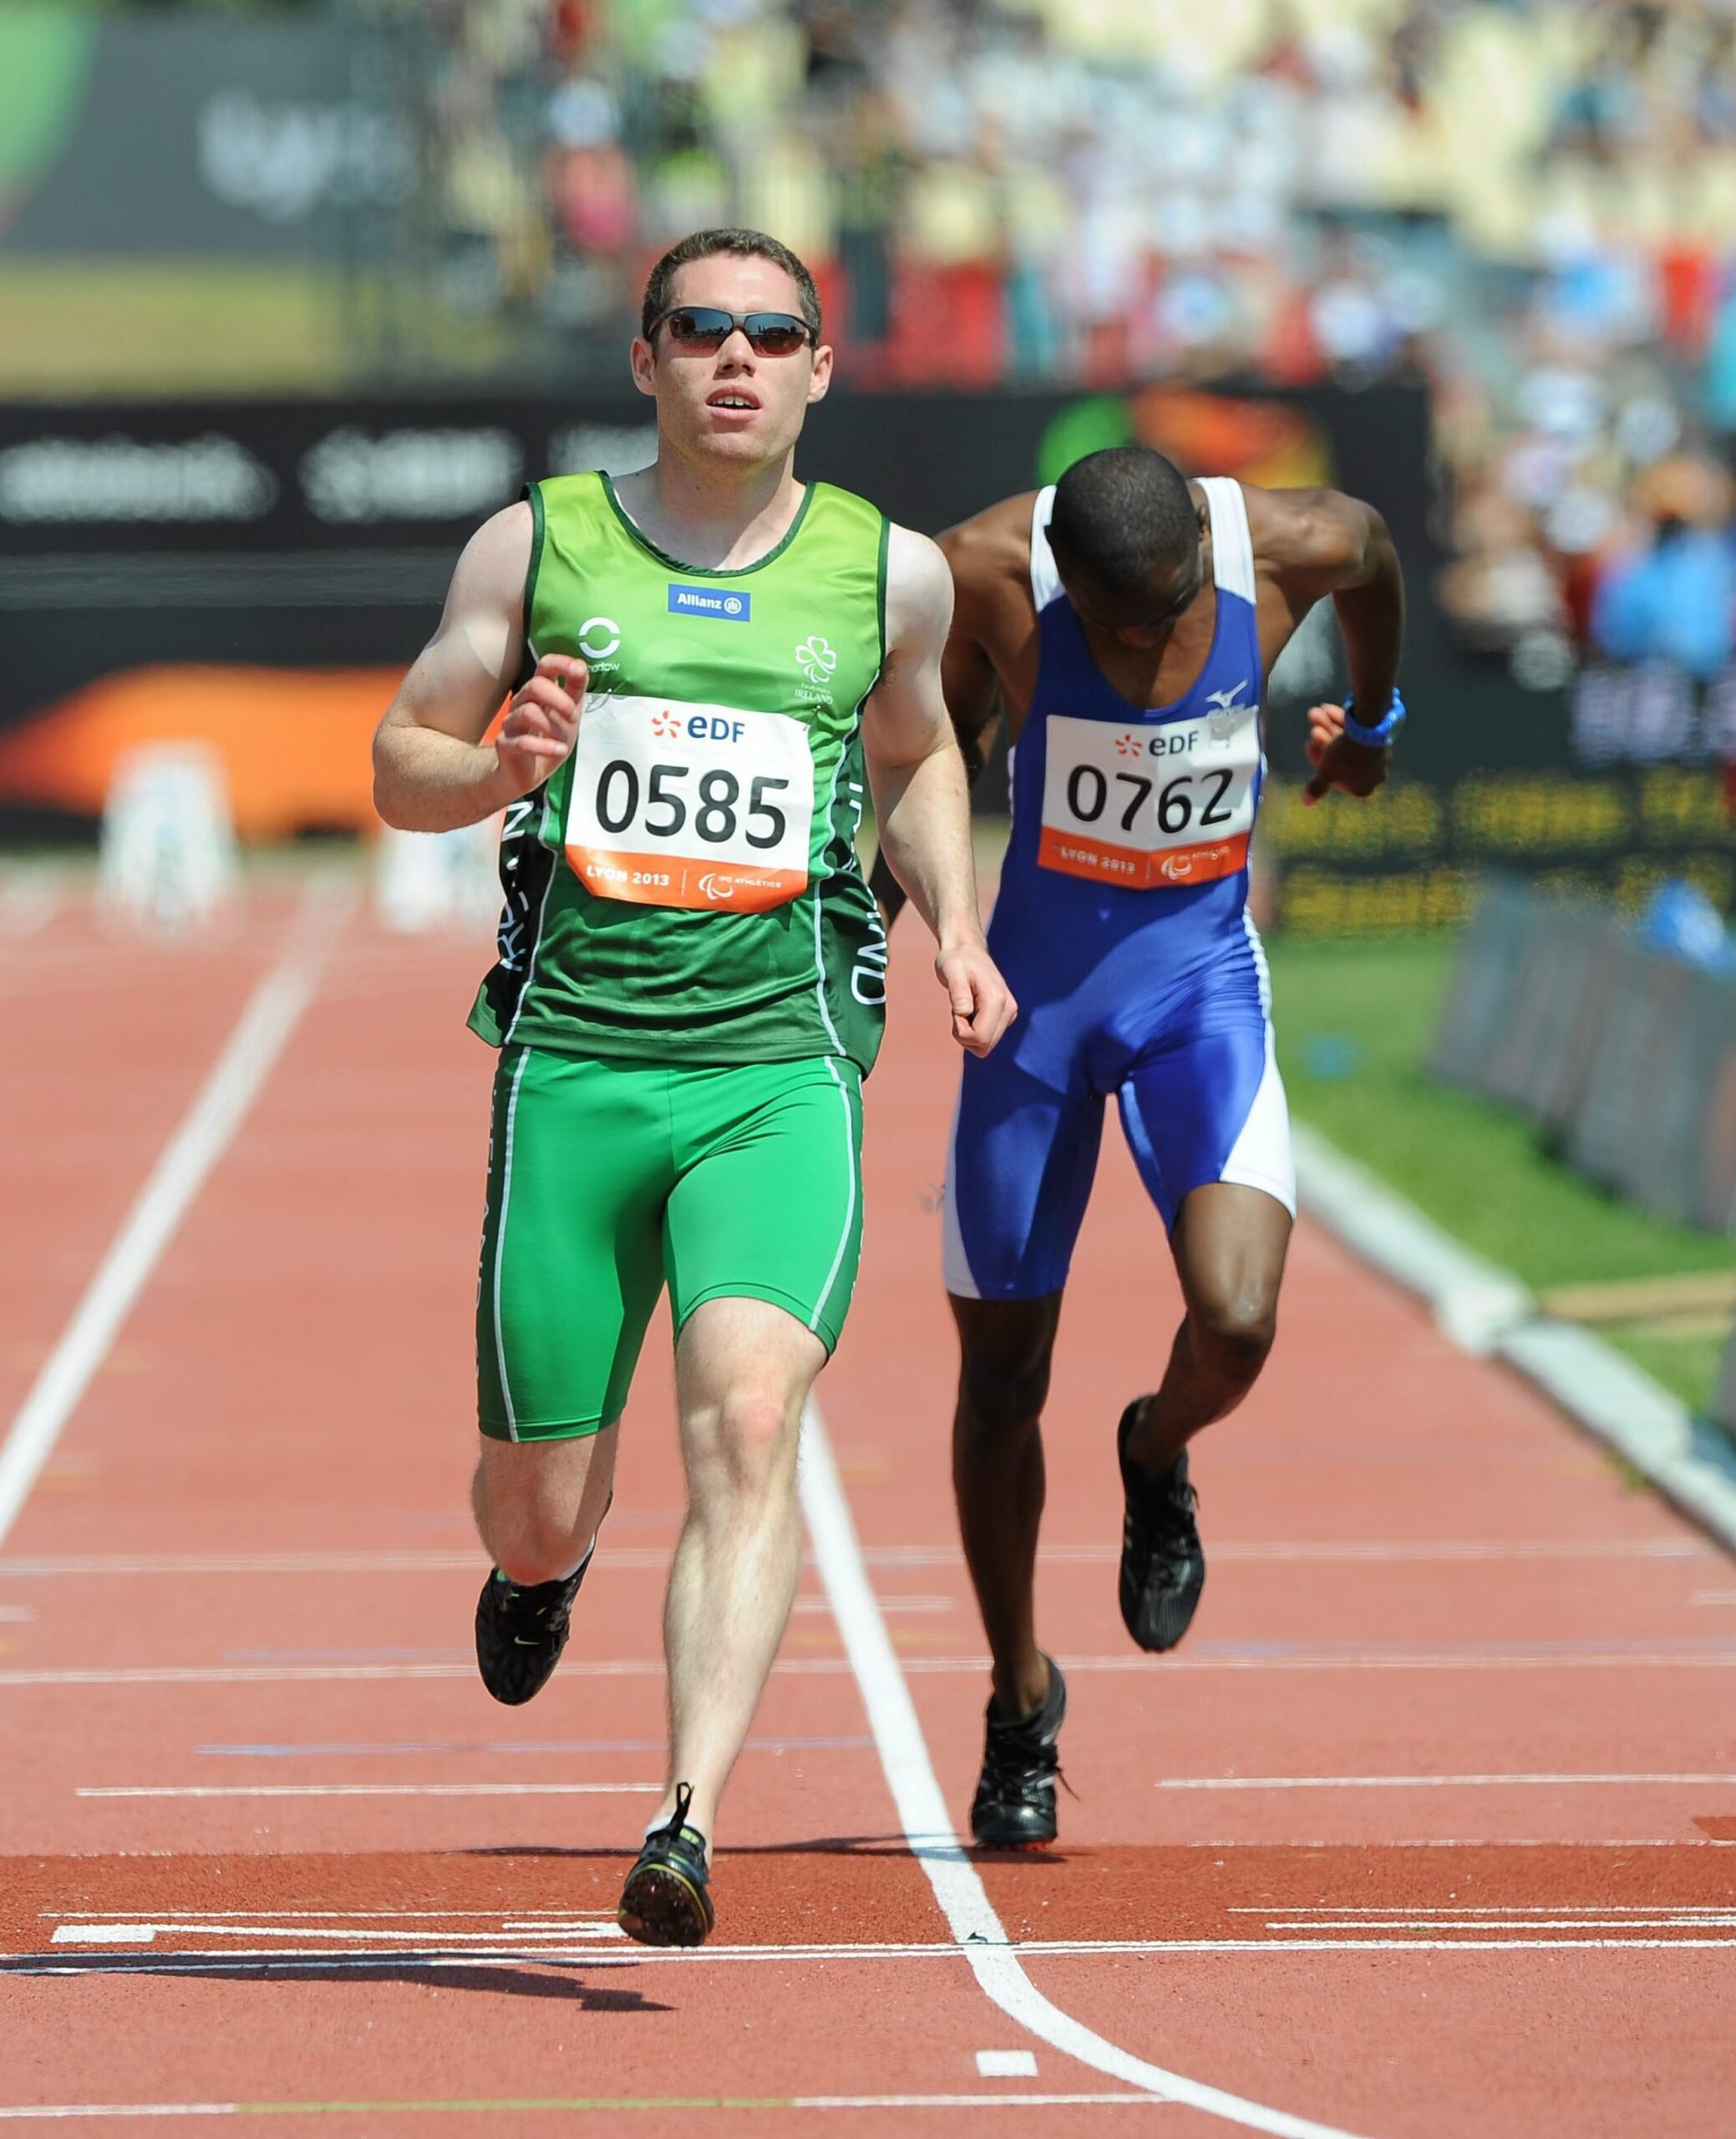 2 athletes running, one in green and one in blue. The athlete in green is ahead